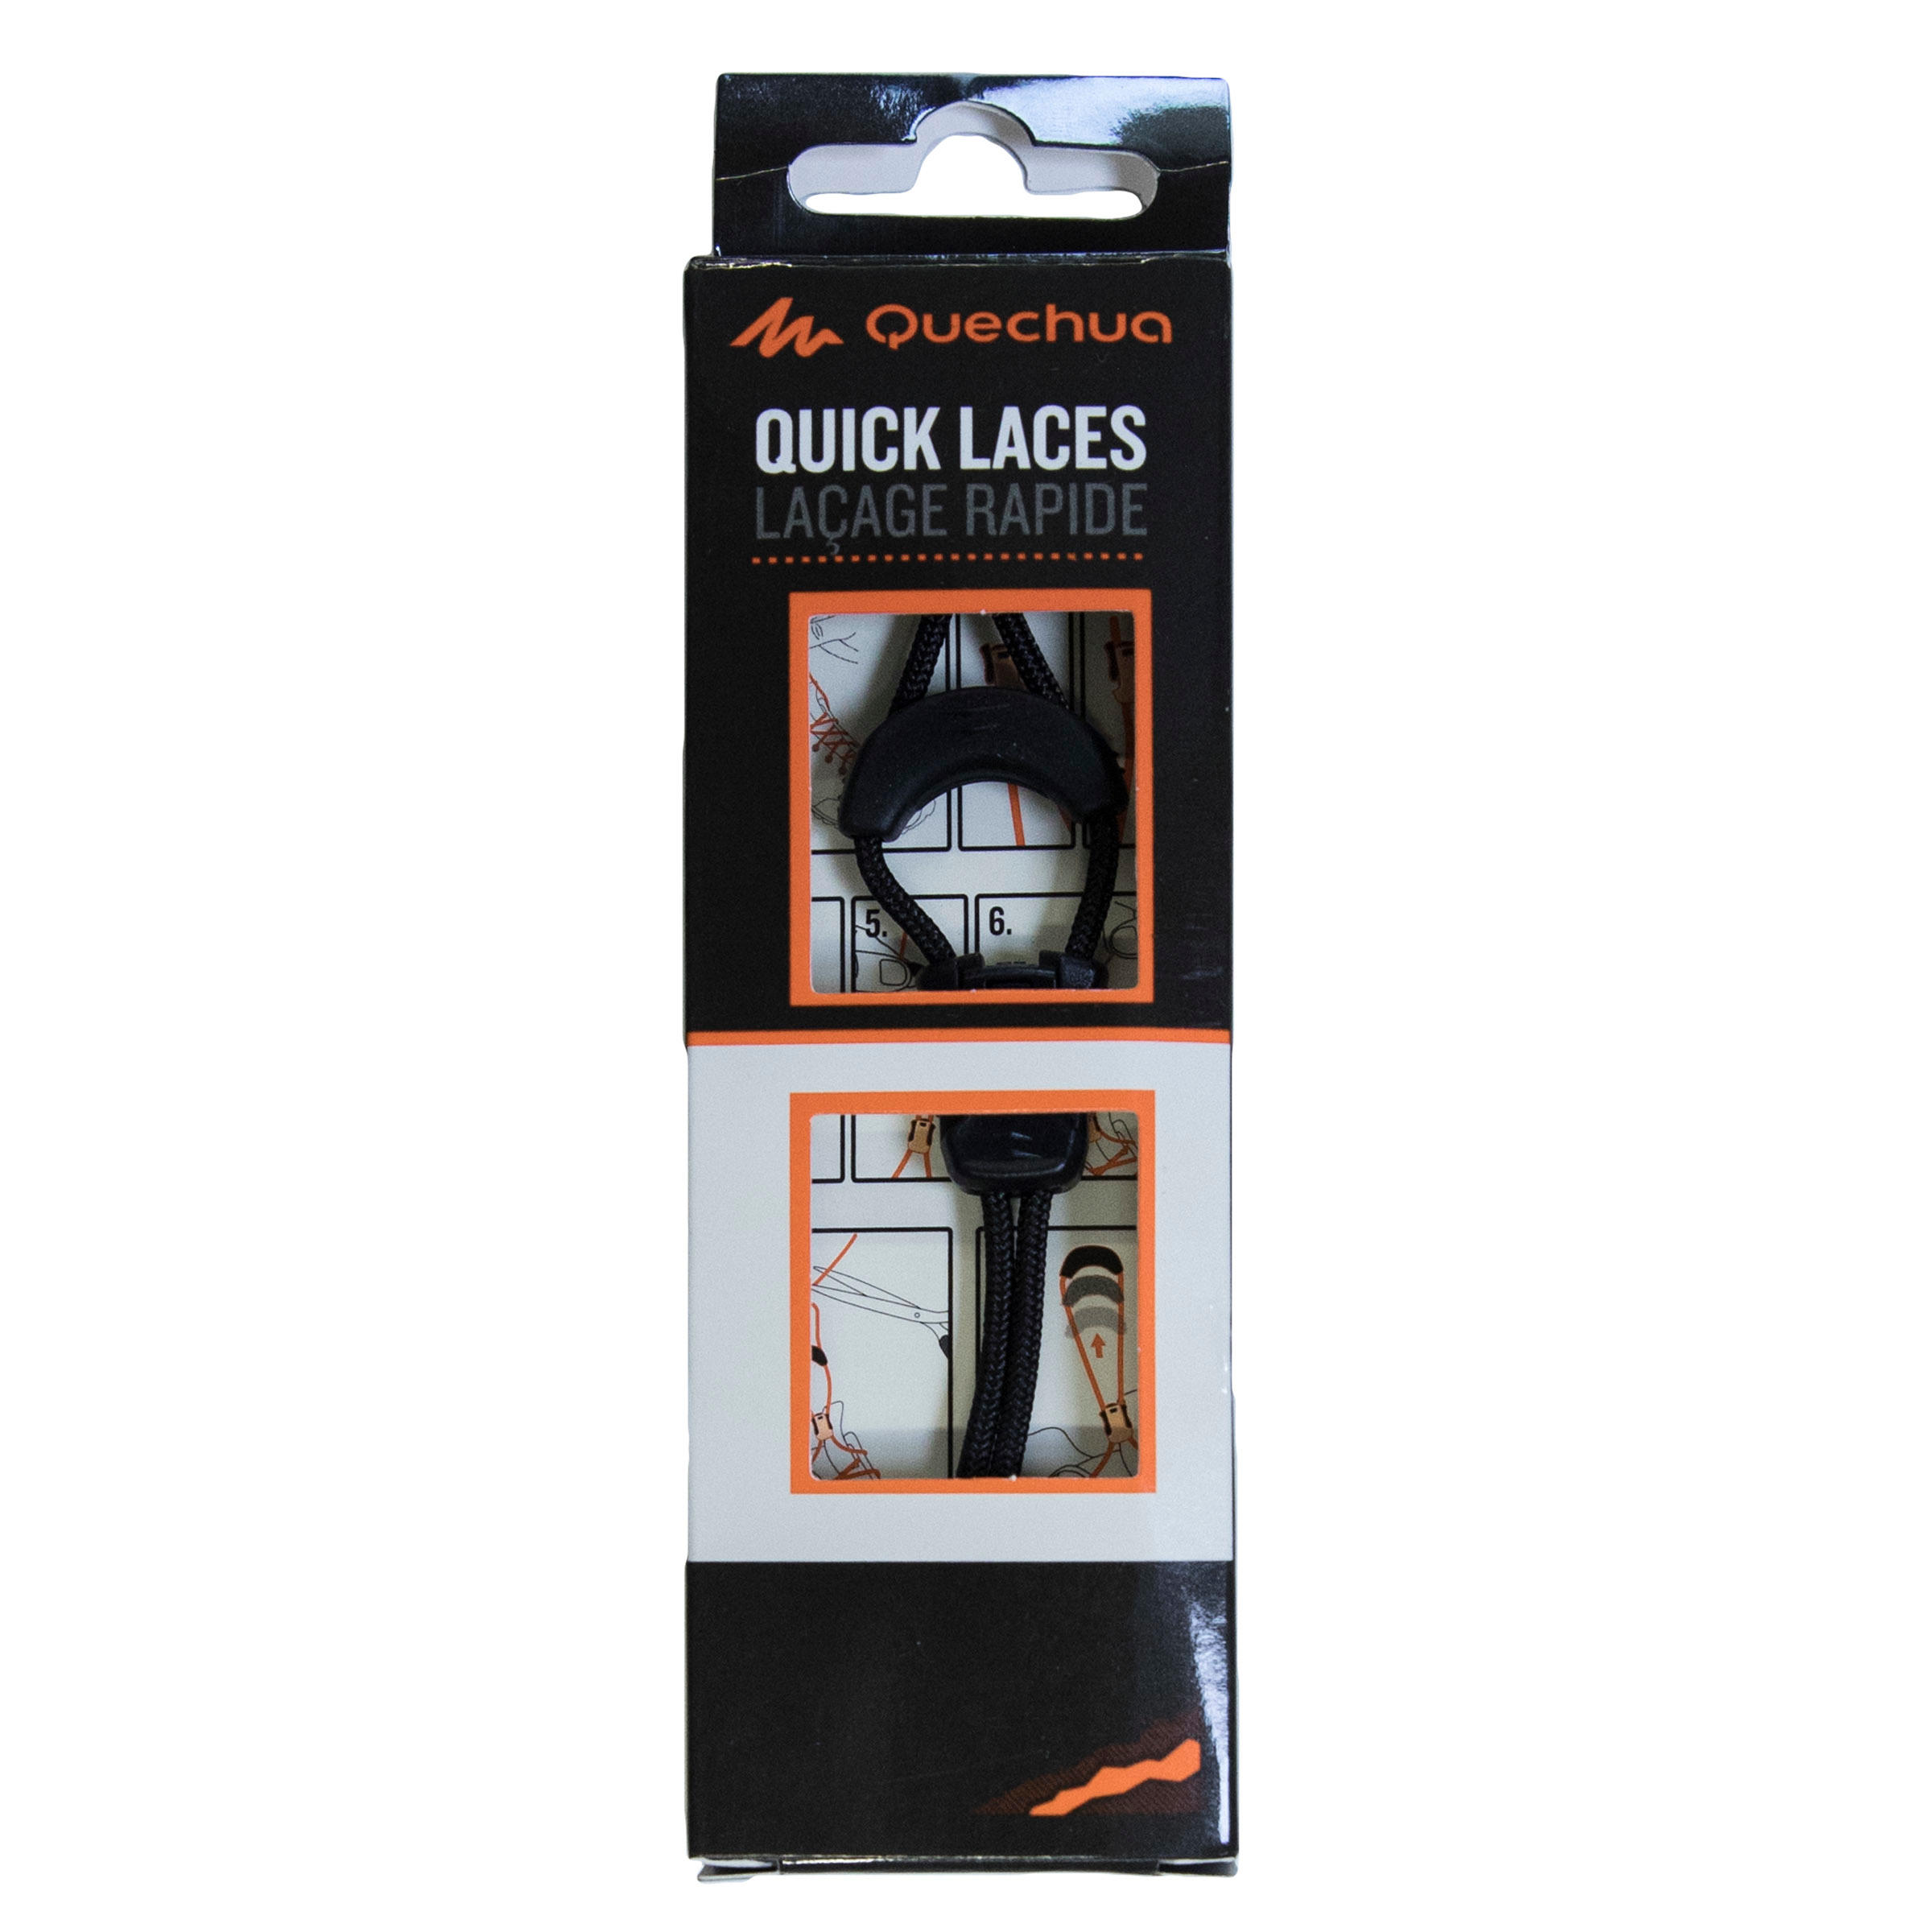 Quick laces for Hiking Boots - QUECHUA